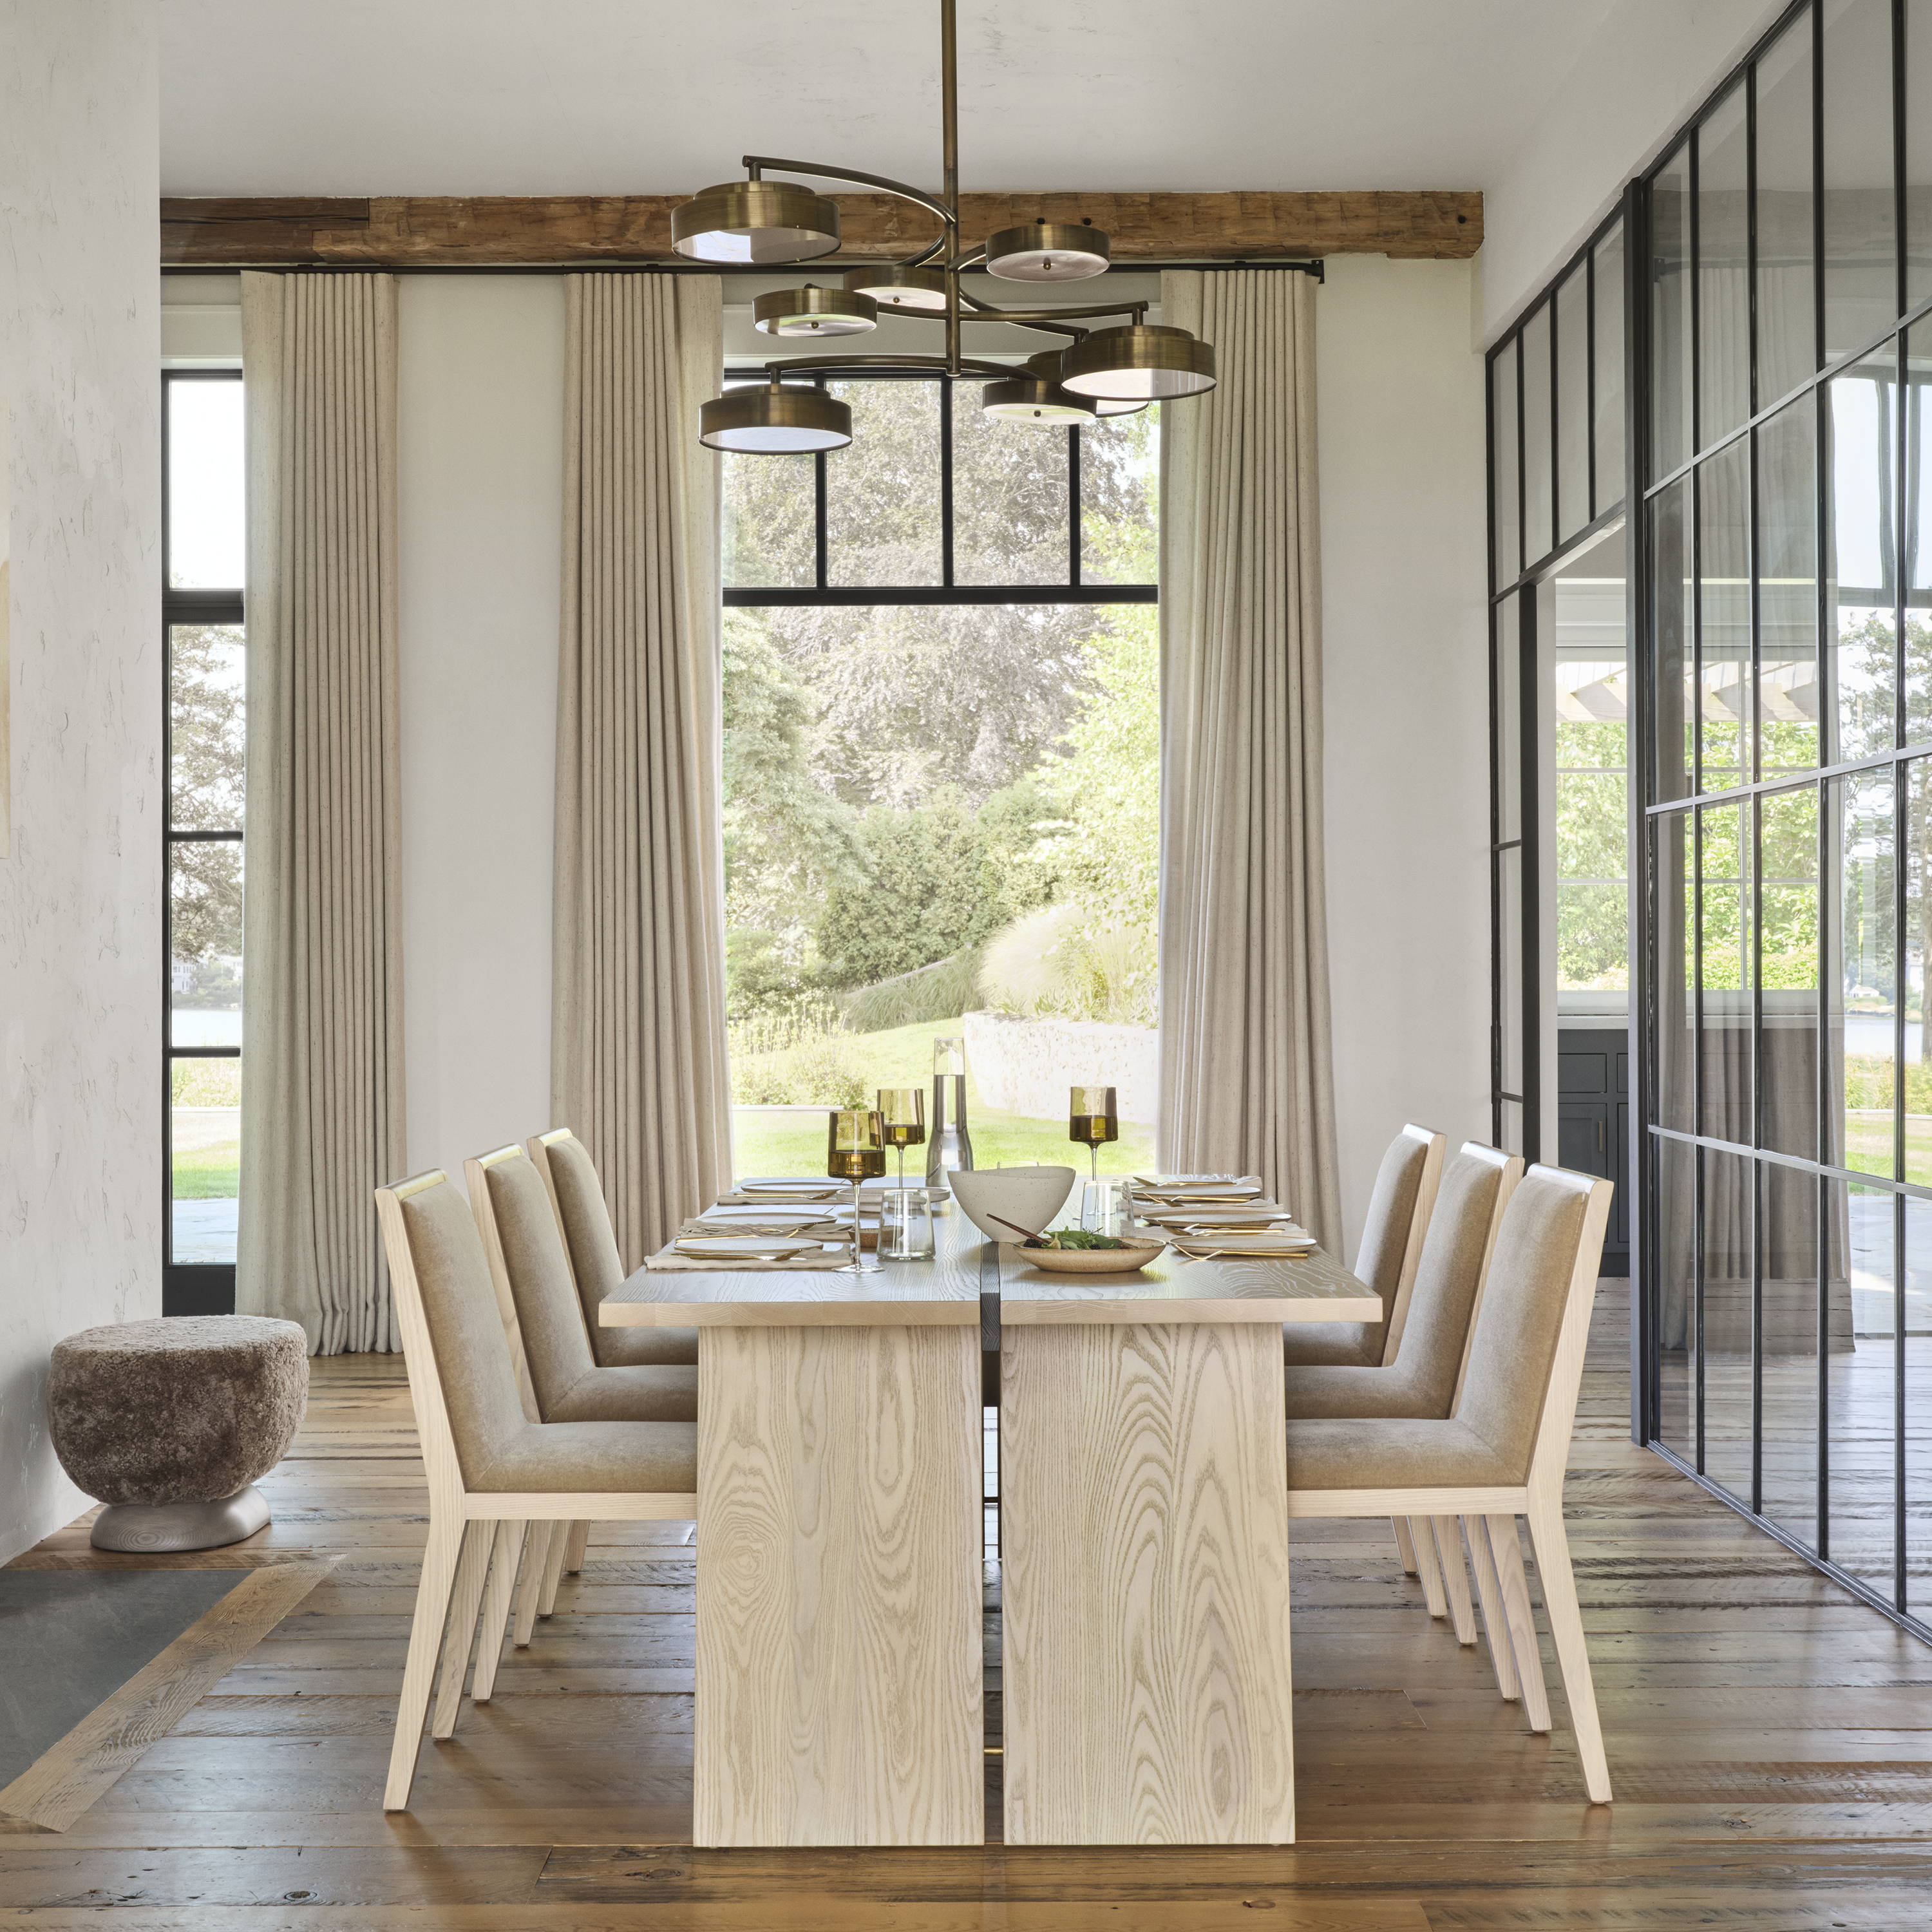 The Graphic Elegance Dining Room